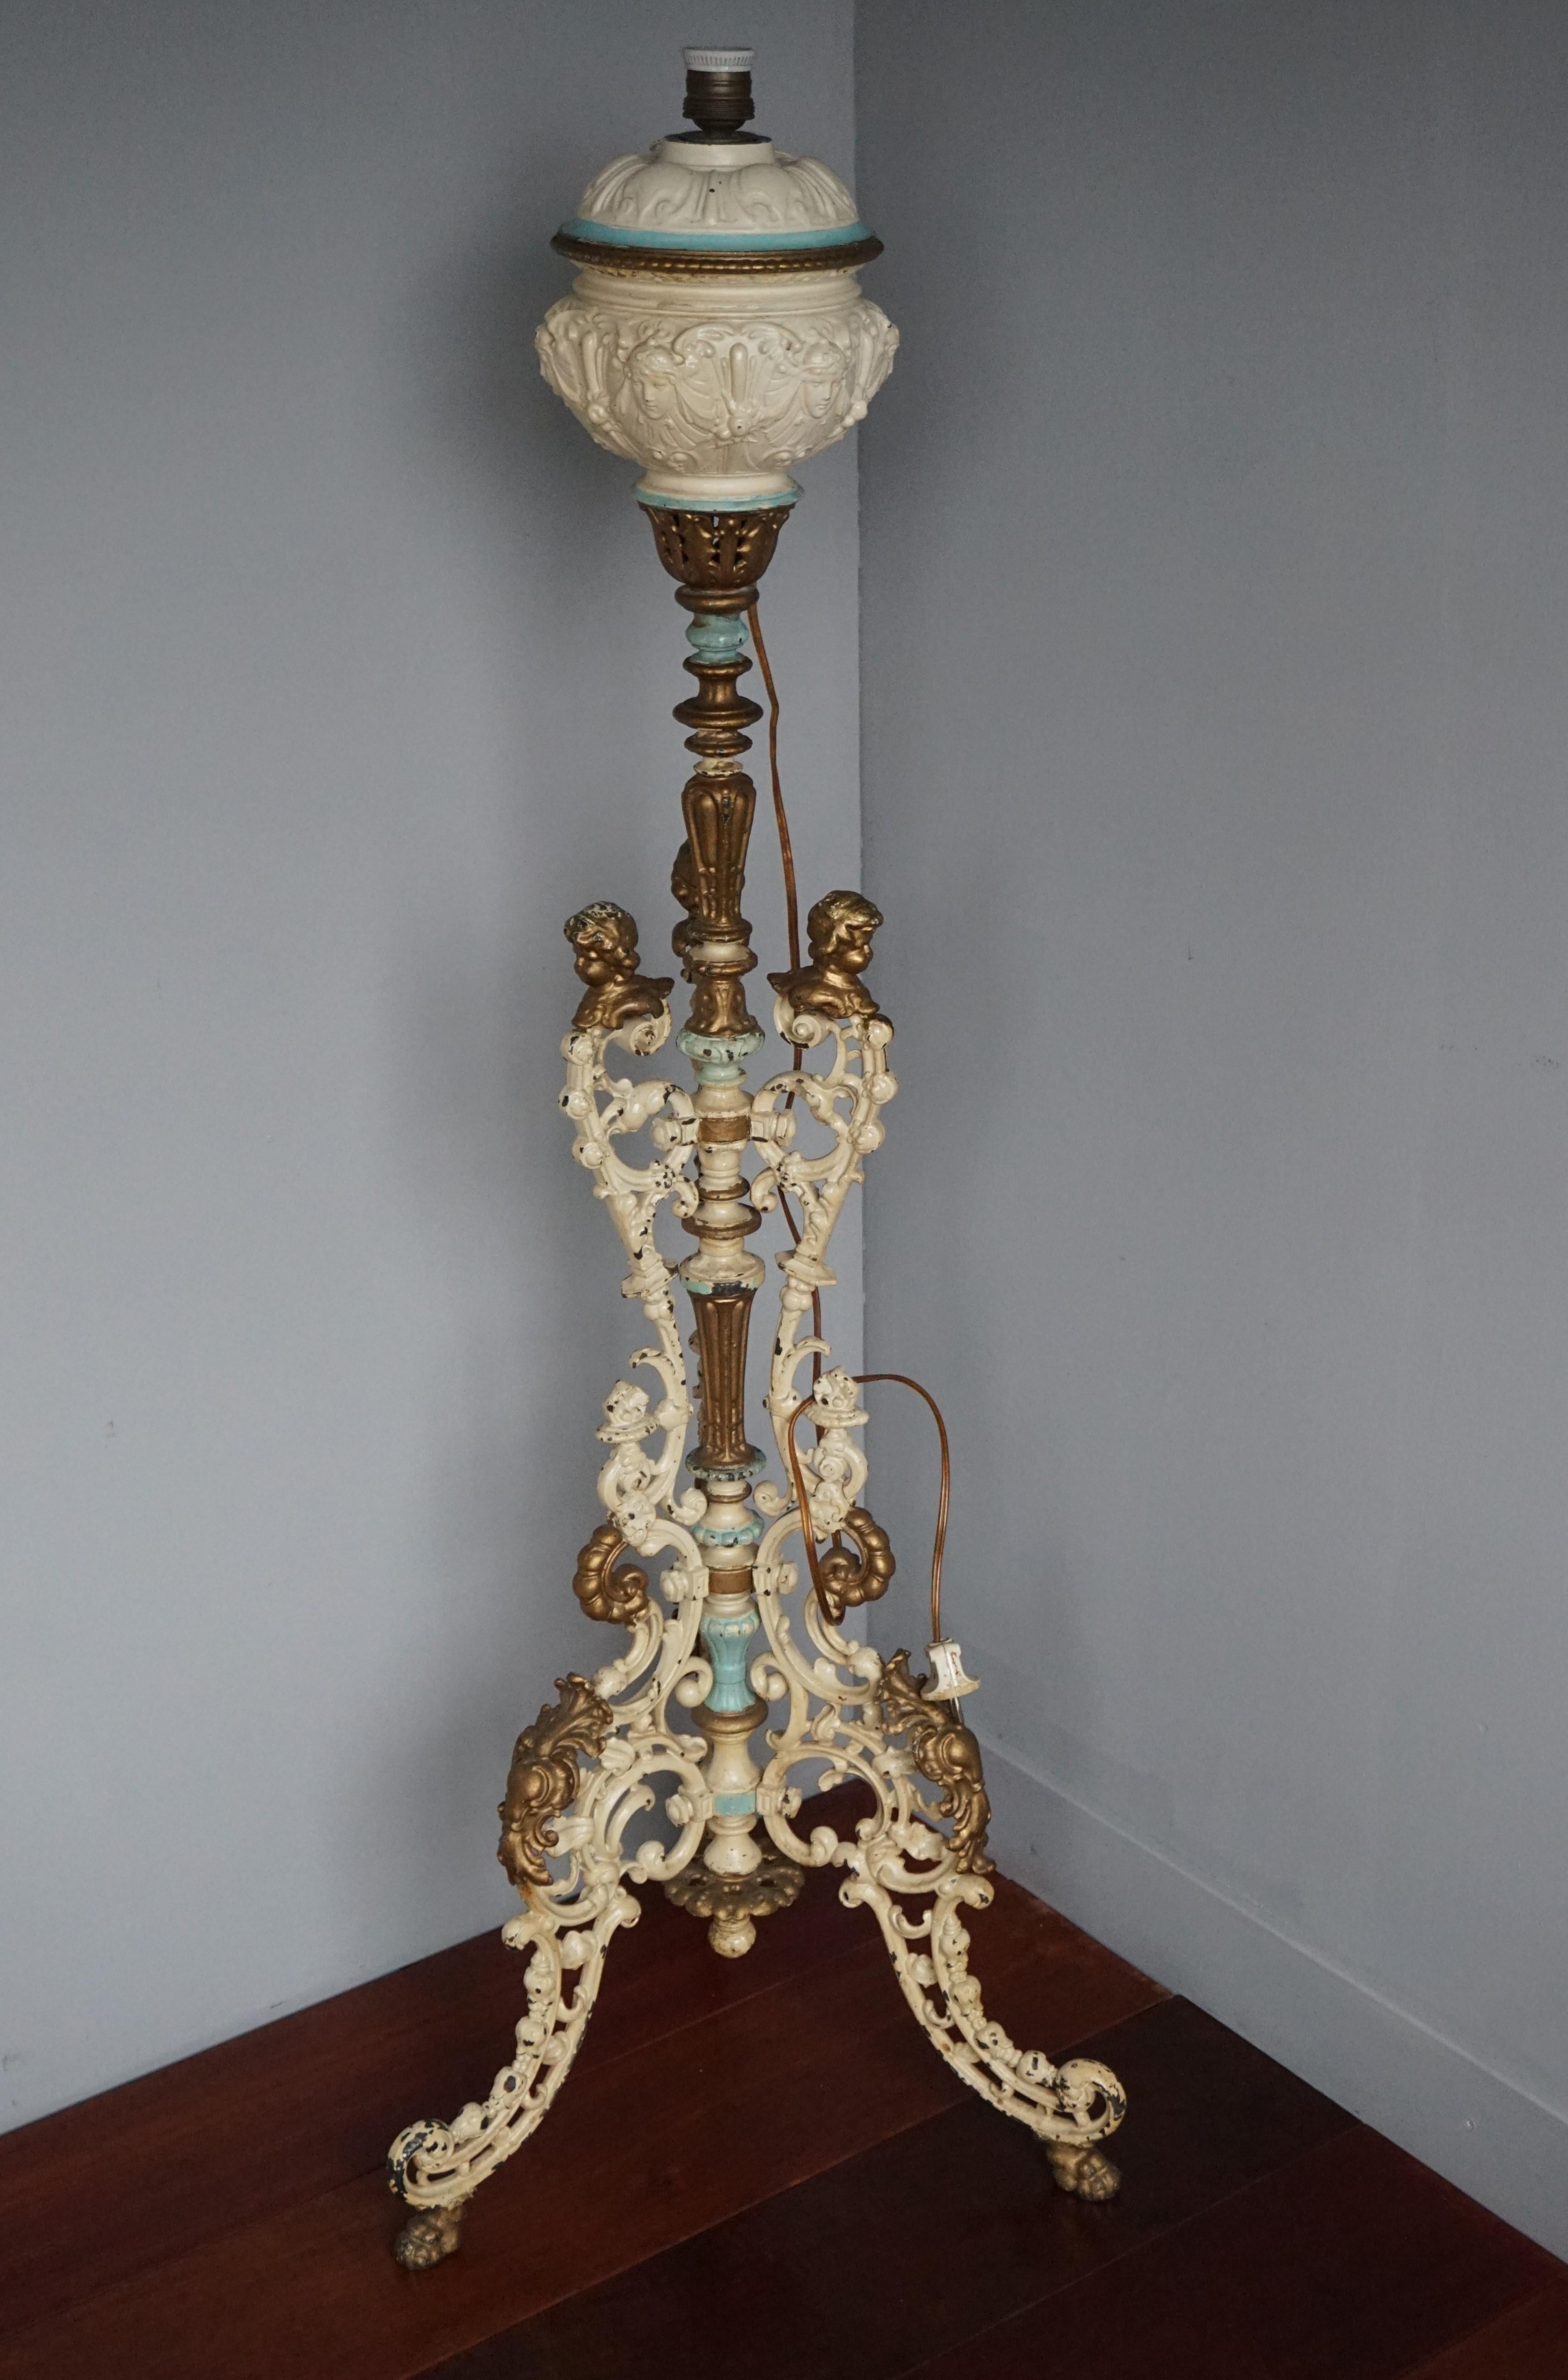 Antique and Painted Cast Iron Baroque Revival Floor Lamp w. Putti Bust Sculpture For Sale 10